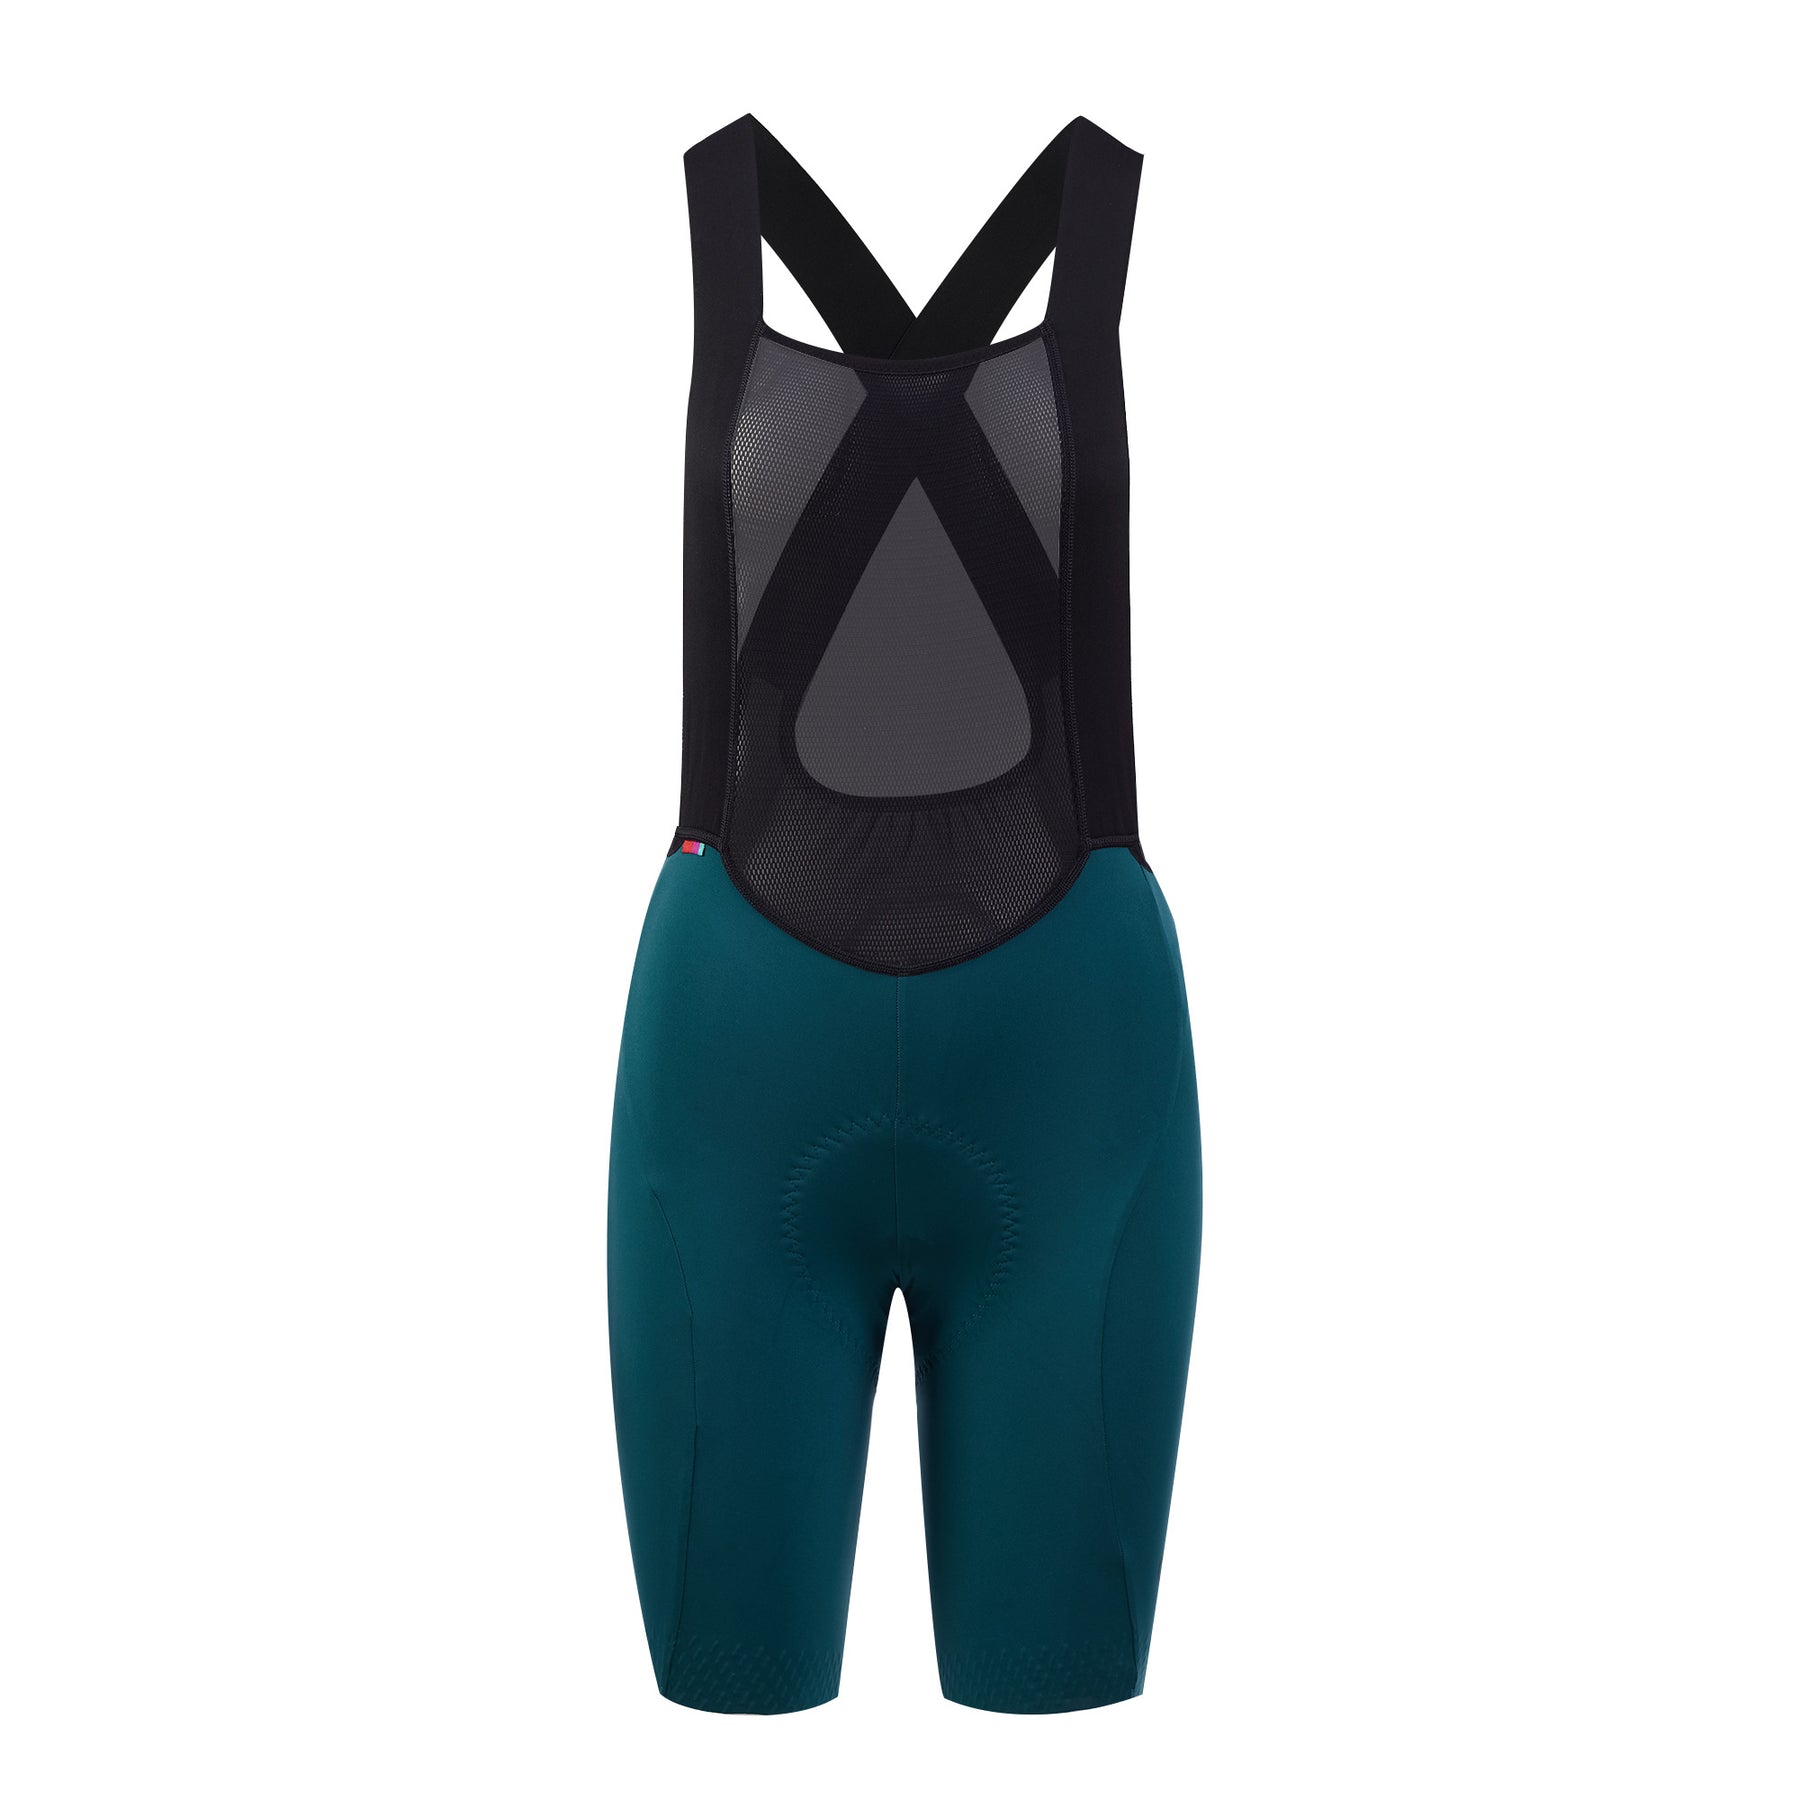 Velocio Luxe cycling bib shorts review: As close to perfect as you can get